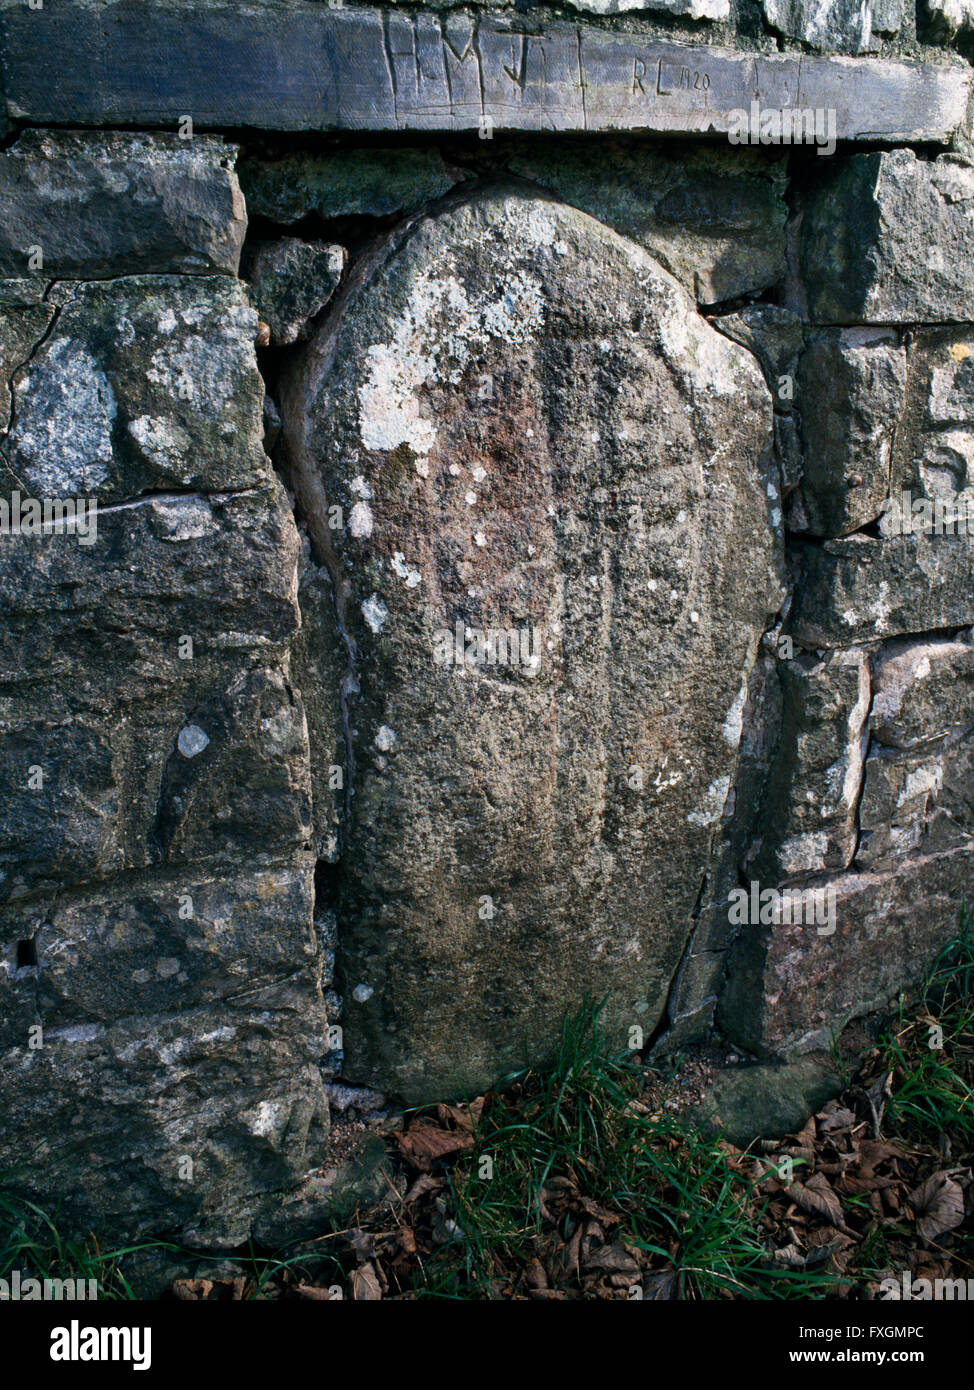 Early Christian cross-marked boulder at Mesur-y-Dorth, Pembrokeshire, possibly a wayside prayer station for pilgrims travelling to St David's. Stock Photo